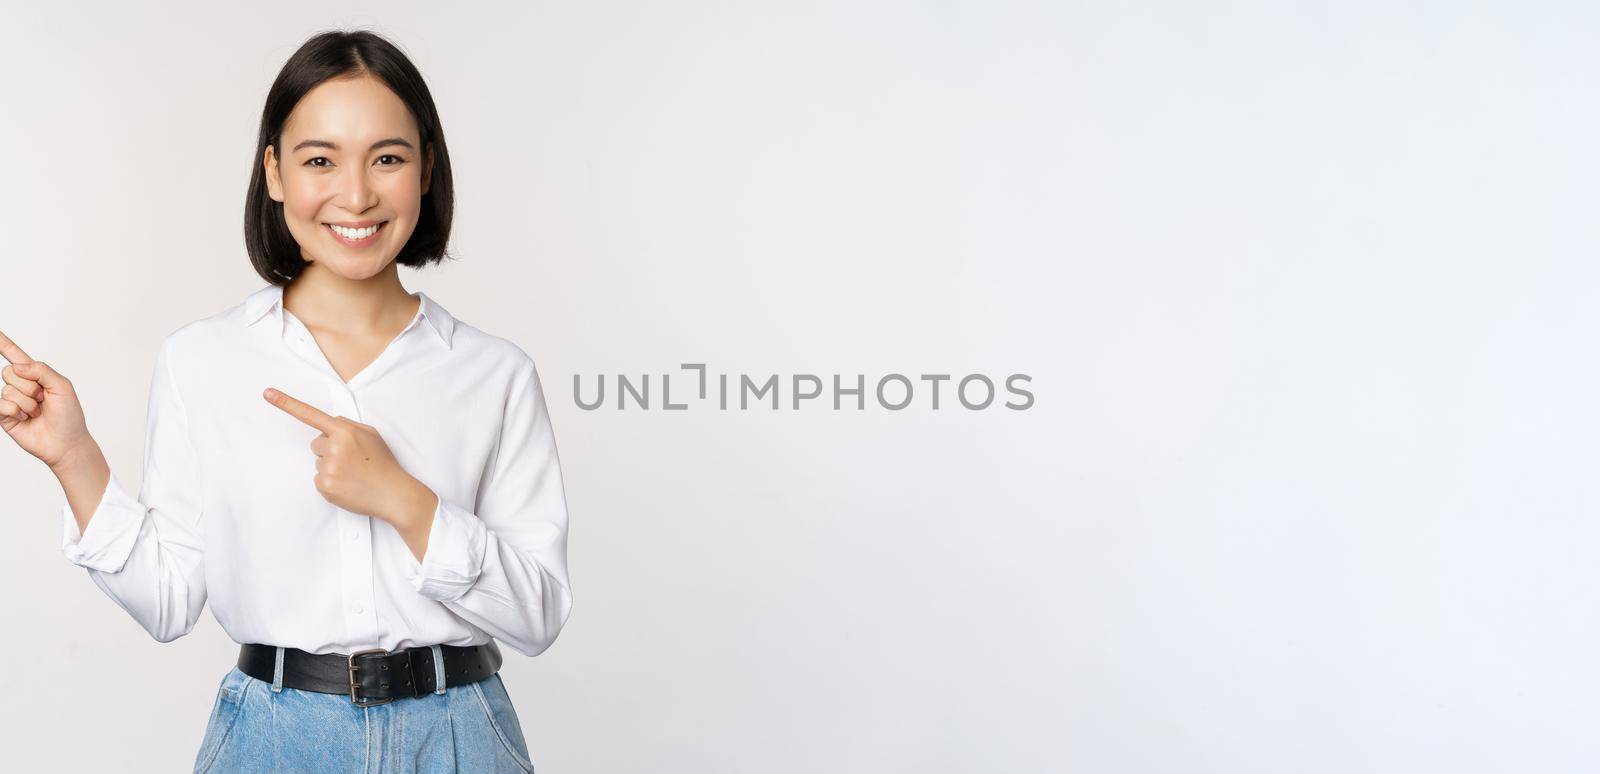 Image of smiling young office lady, asian business entrepreneur pointing fingers left, showing client info, chart of banner aside on copy space, white background.